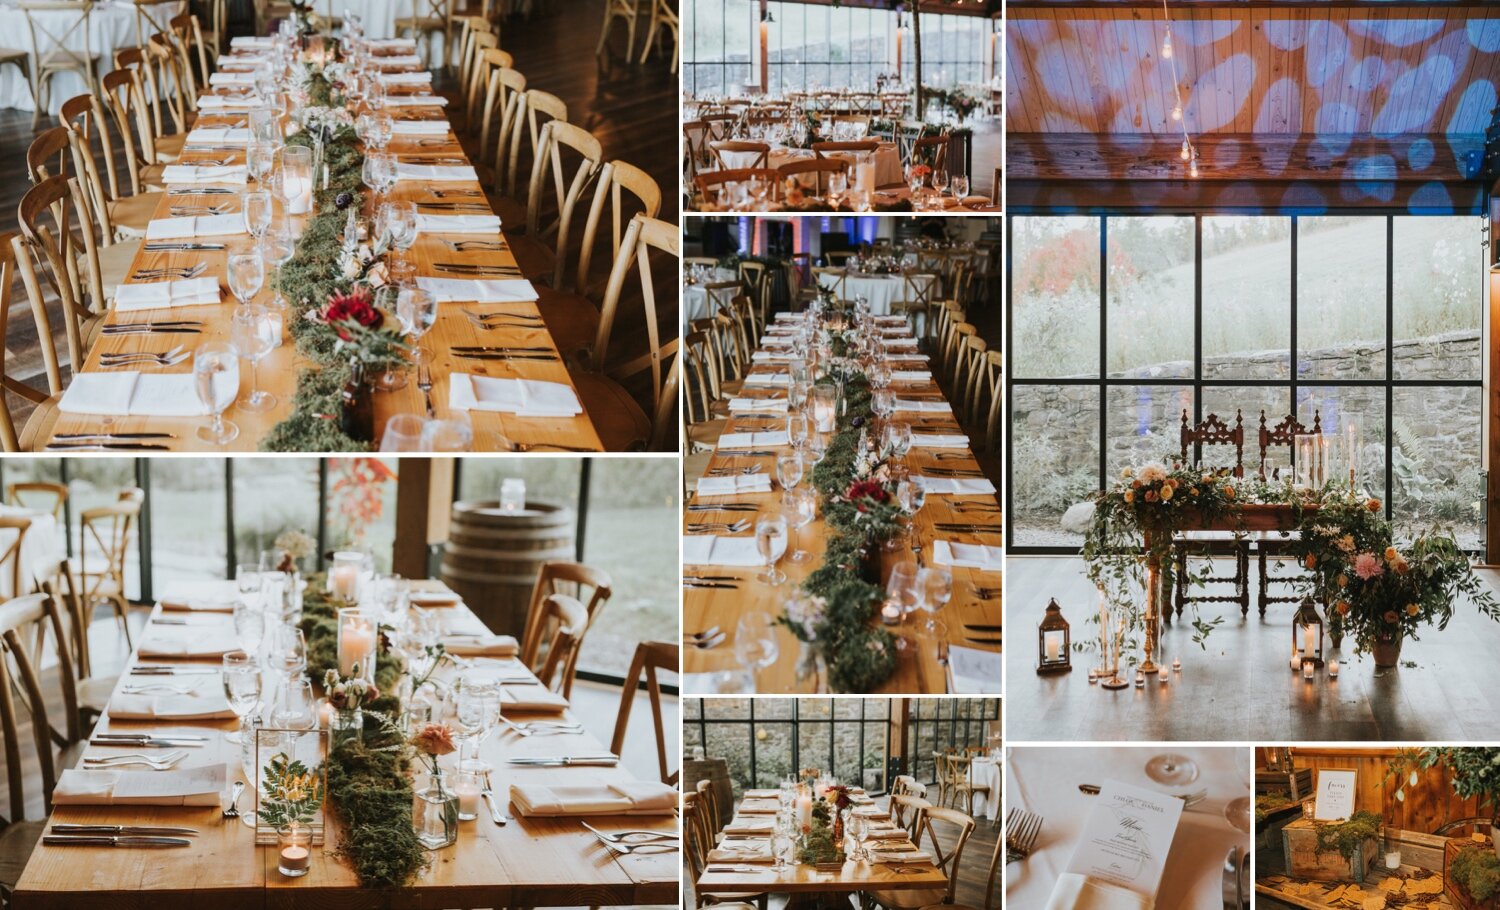 Hudson Valley Wedding Photographer, New York Wedding Photographer, Red Maple Vineyard, Red Maple Vineyard Wedding, New Paltz Wedding, Reception Details, Tablescapes 